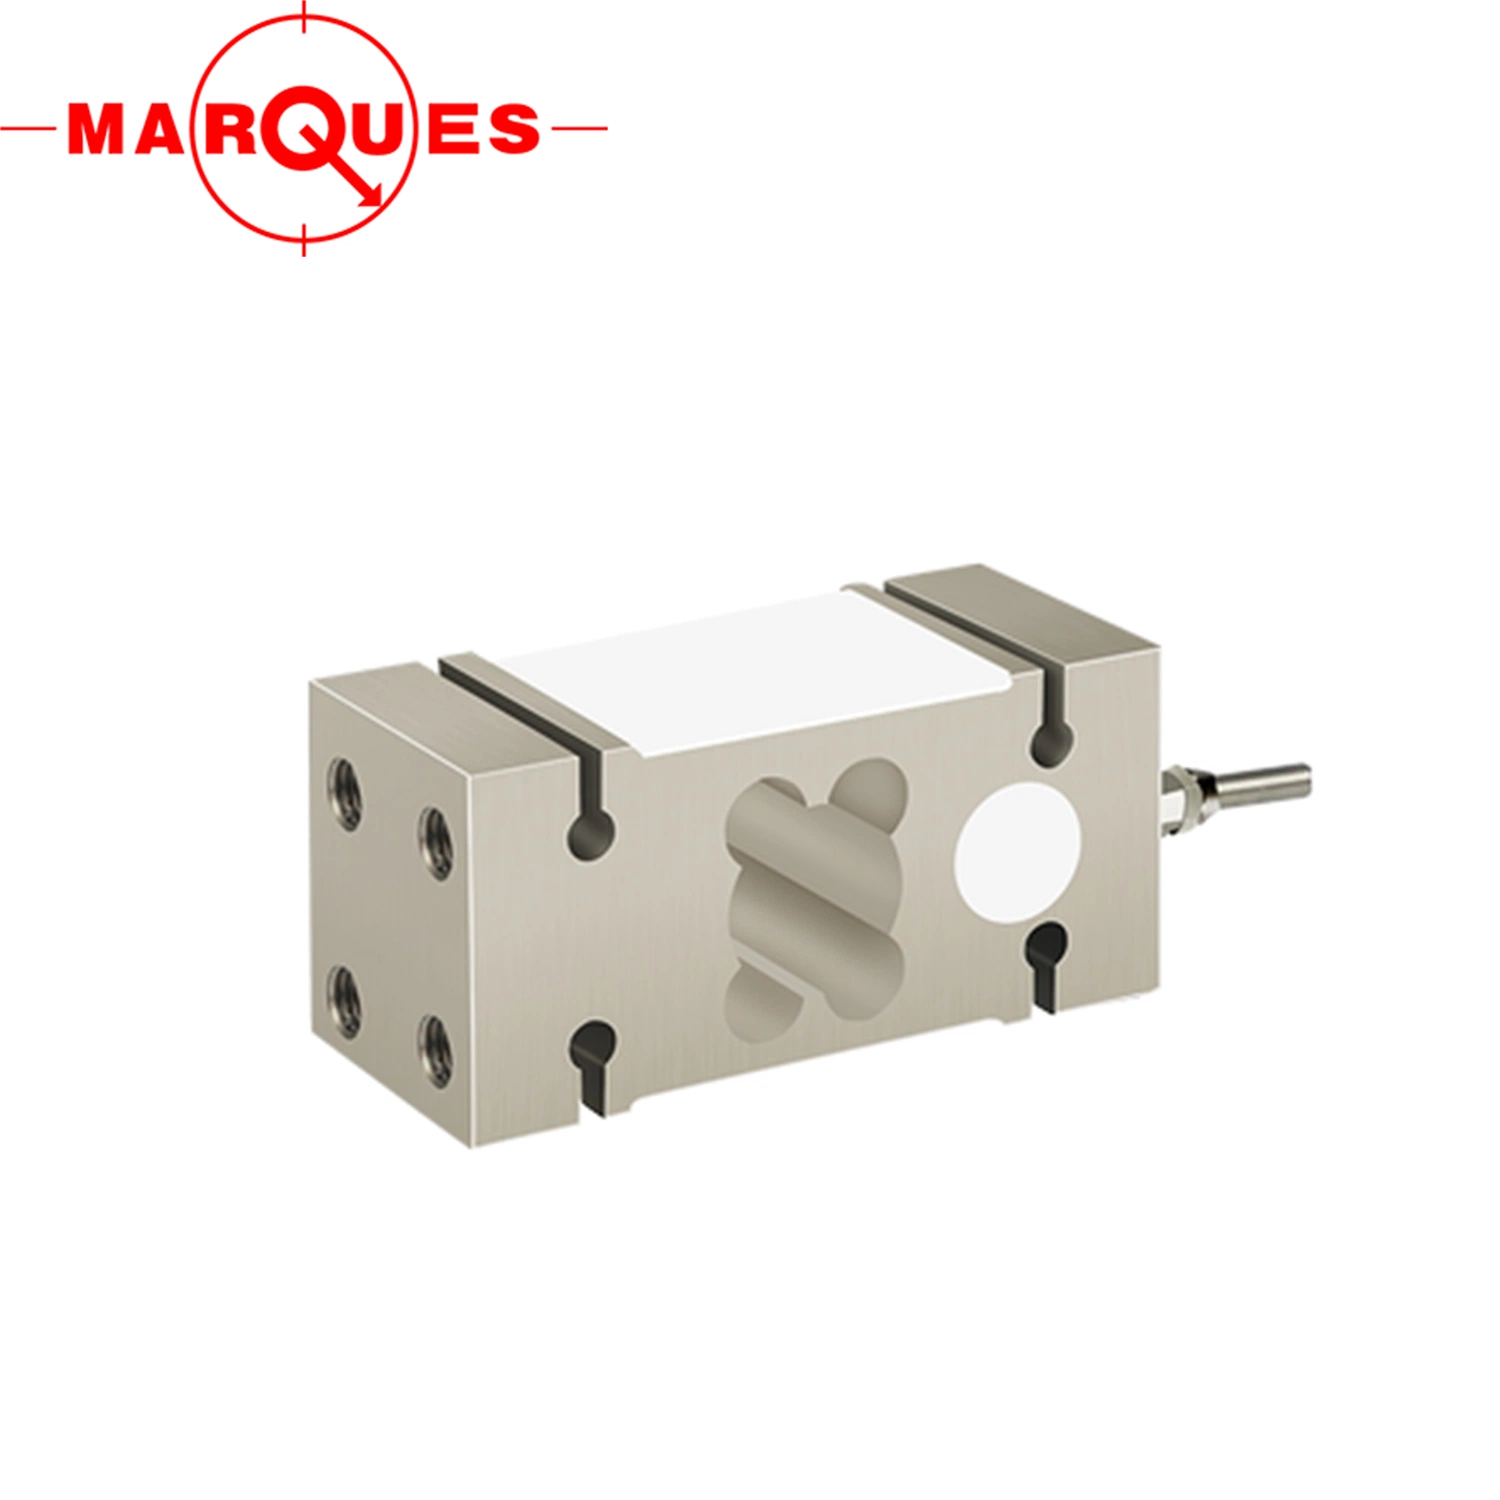 Aluminum Single Point IP67 Analog Type Weighing Load Cell